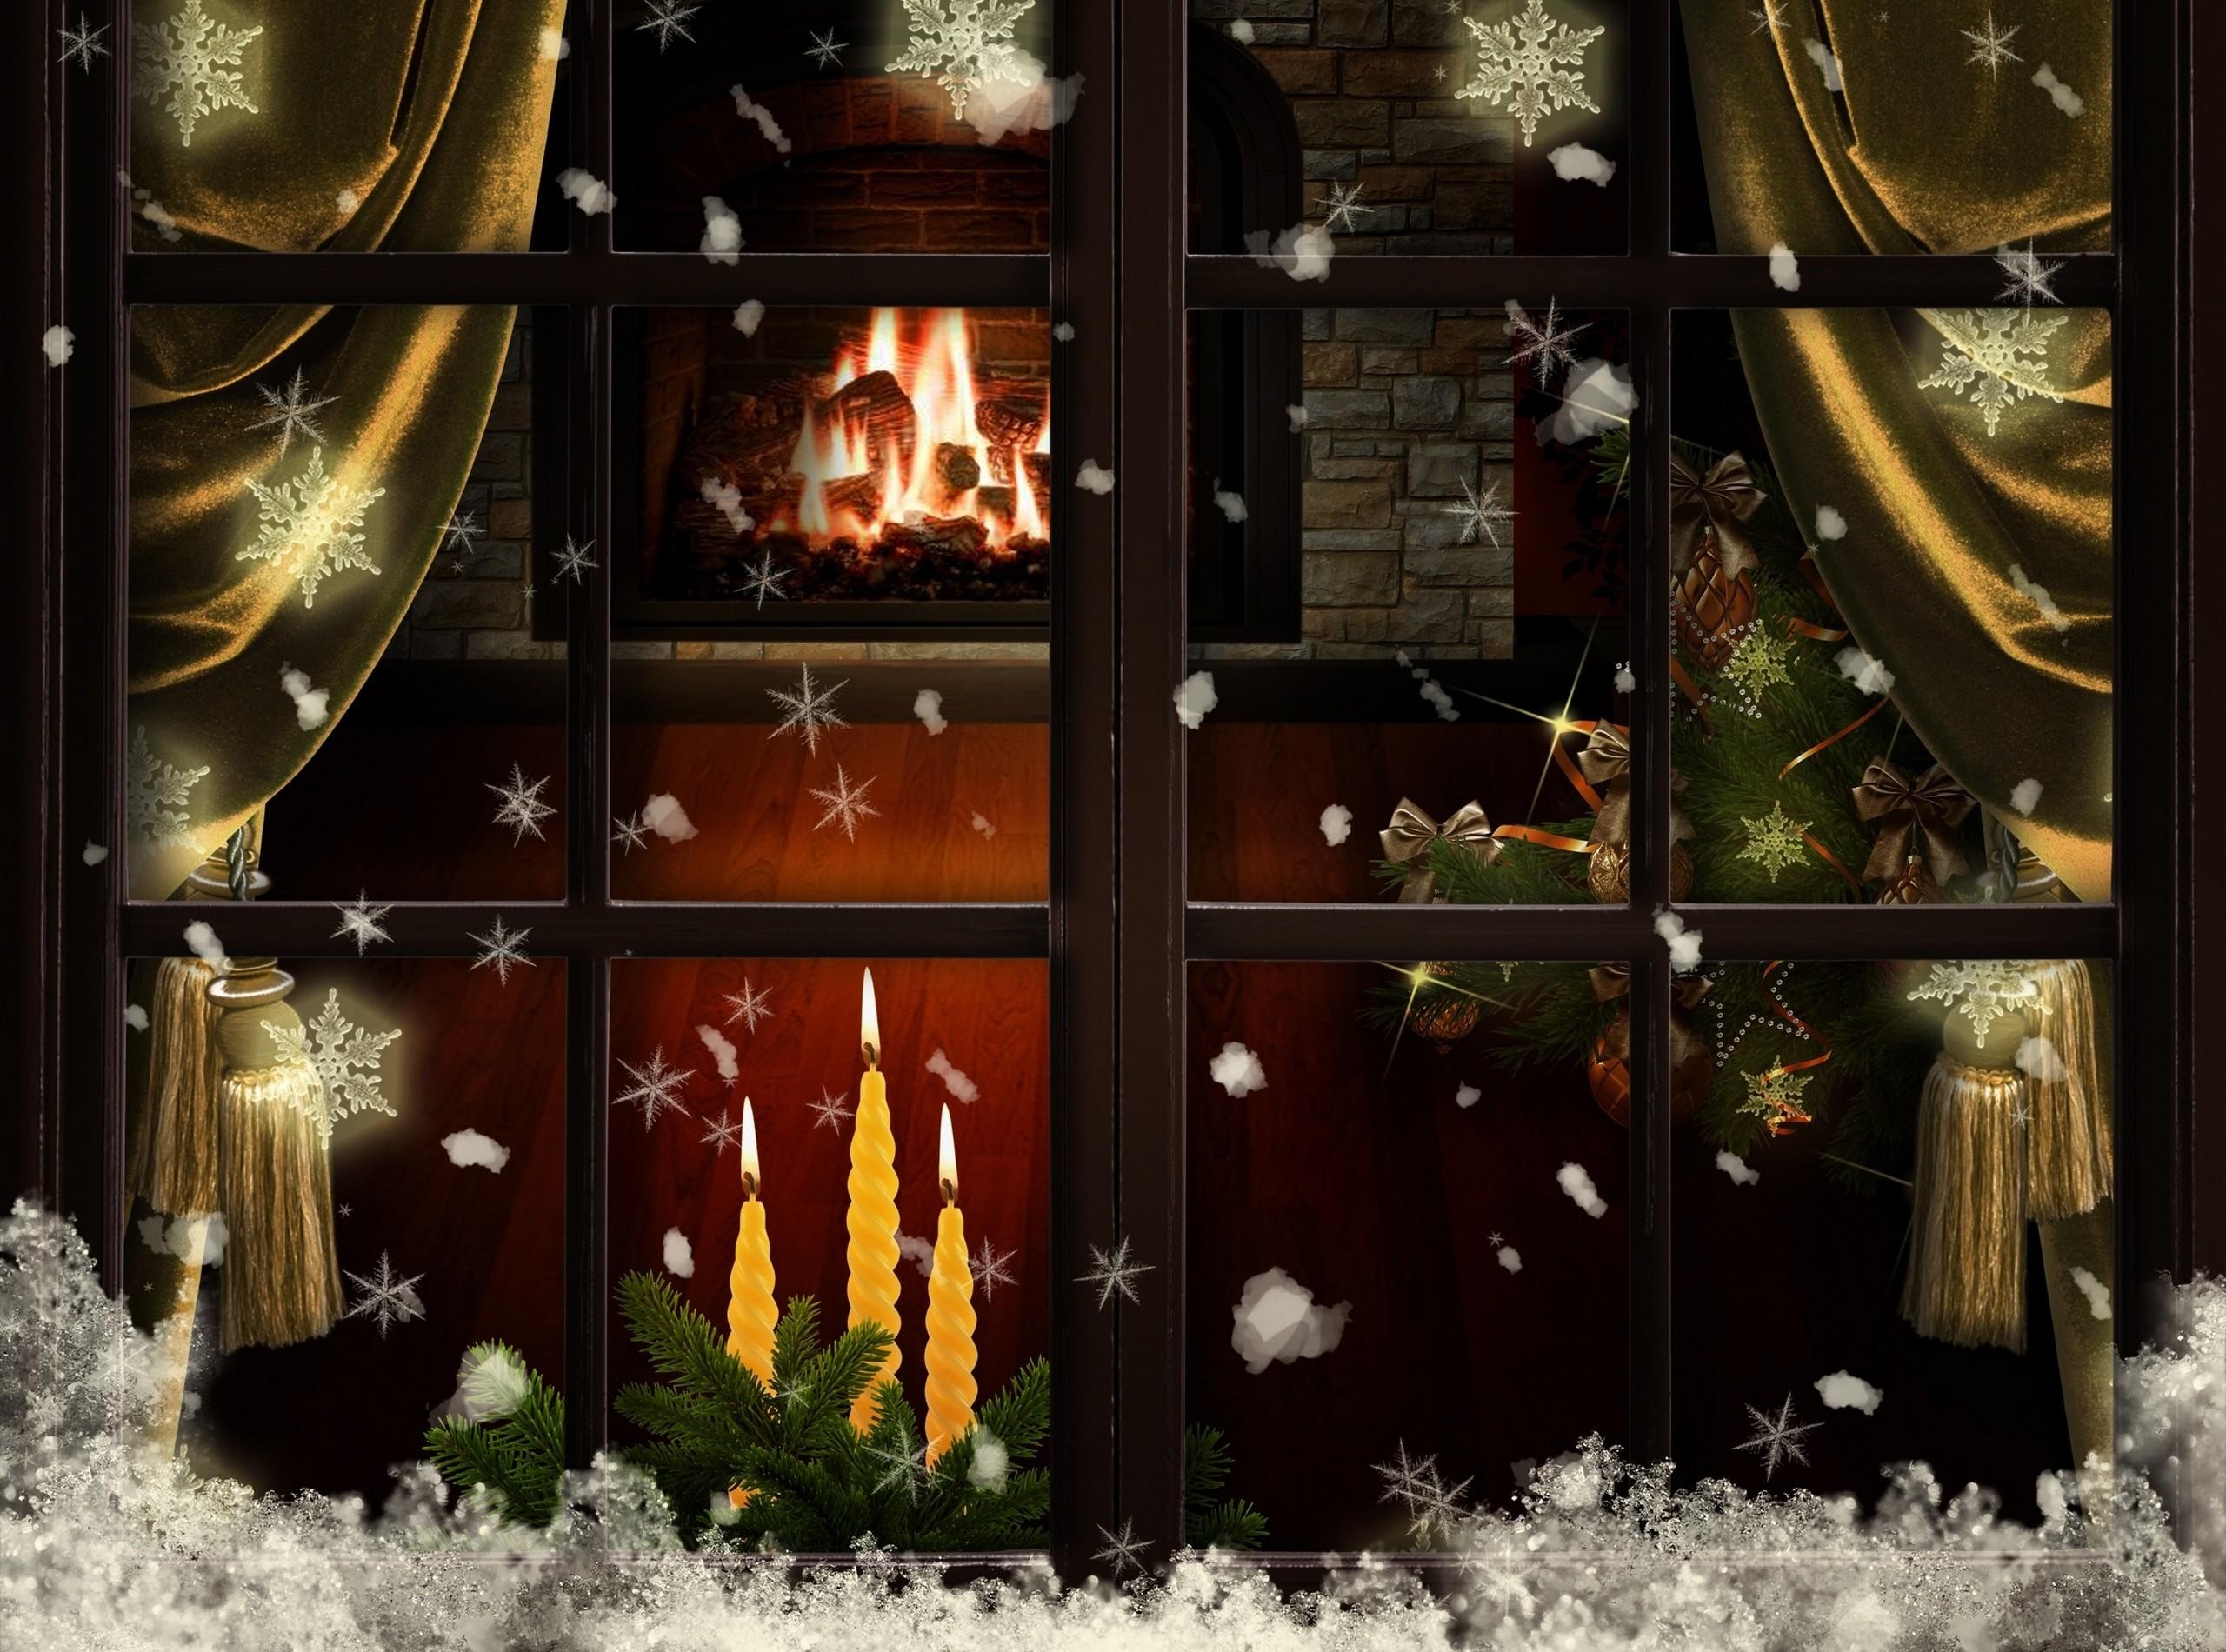 2560x1900 Christmas Fireplace Fire Holiday Festive Decorations Y Wallpaper   Wallpaperup